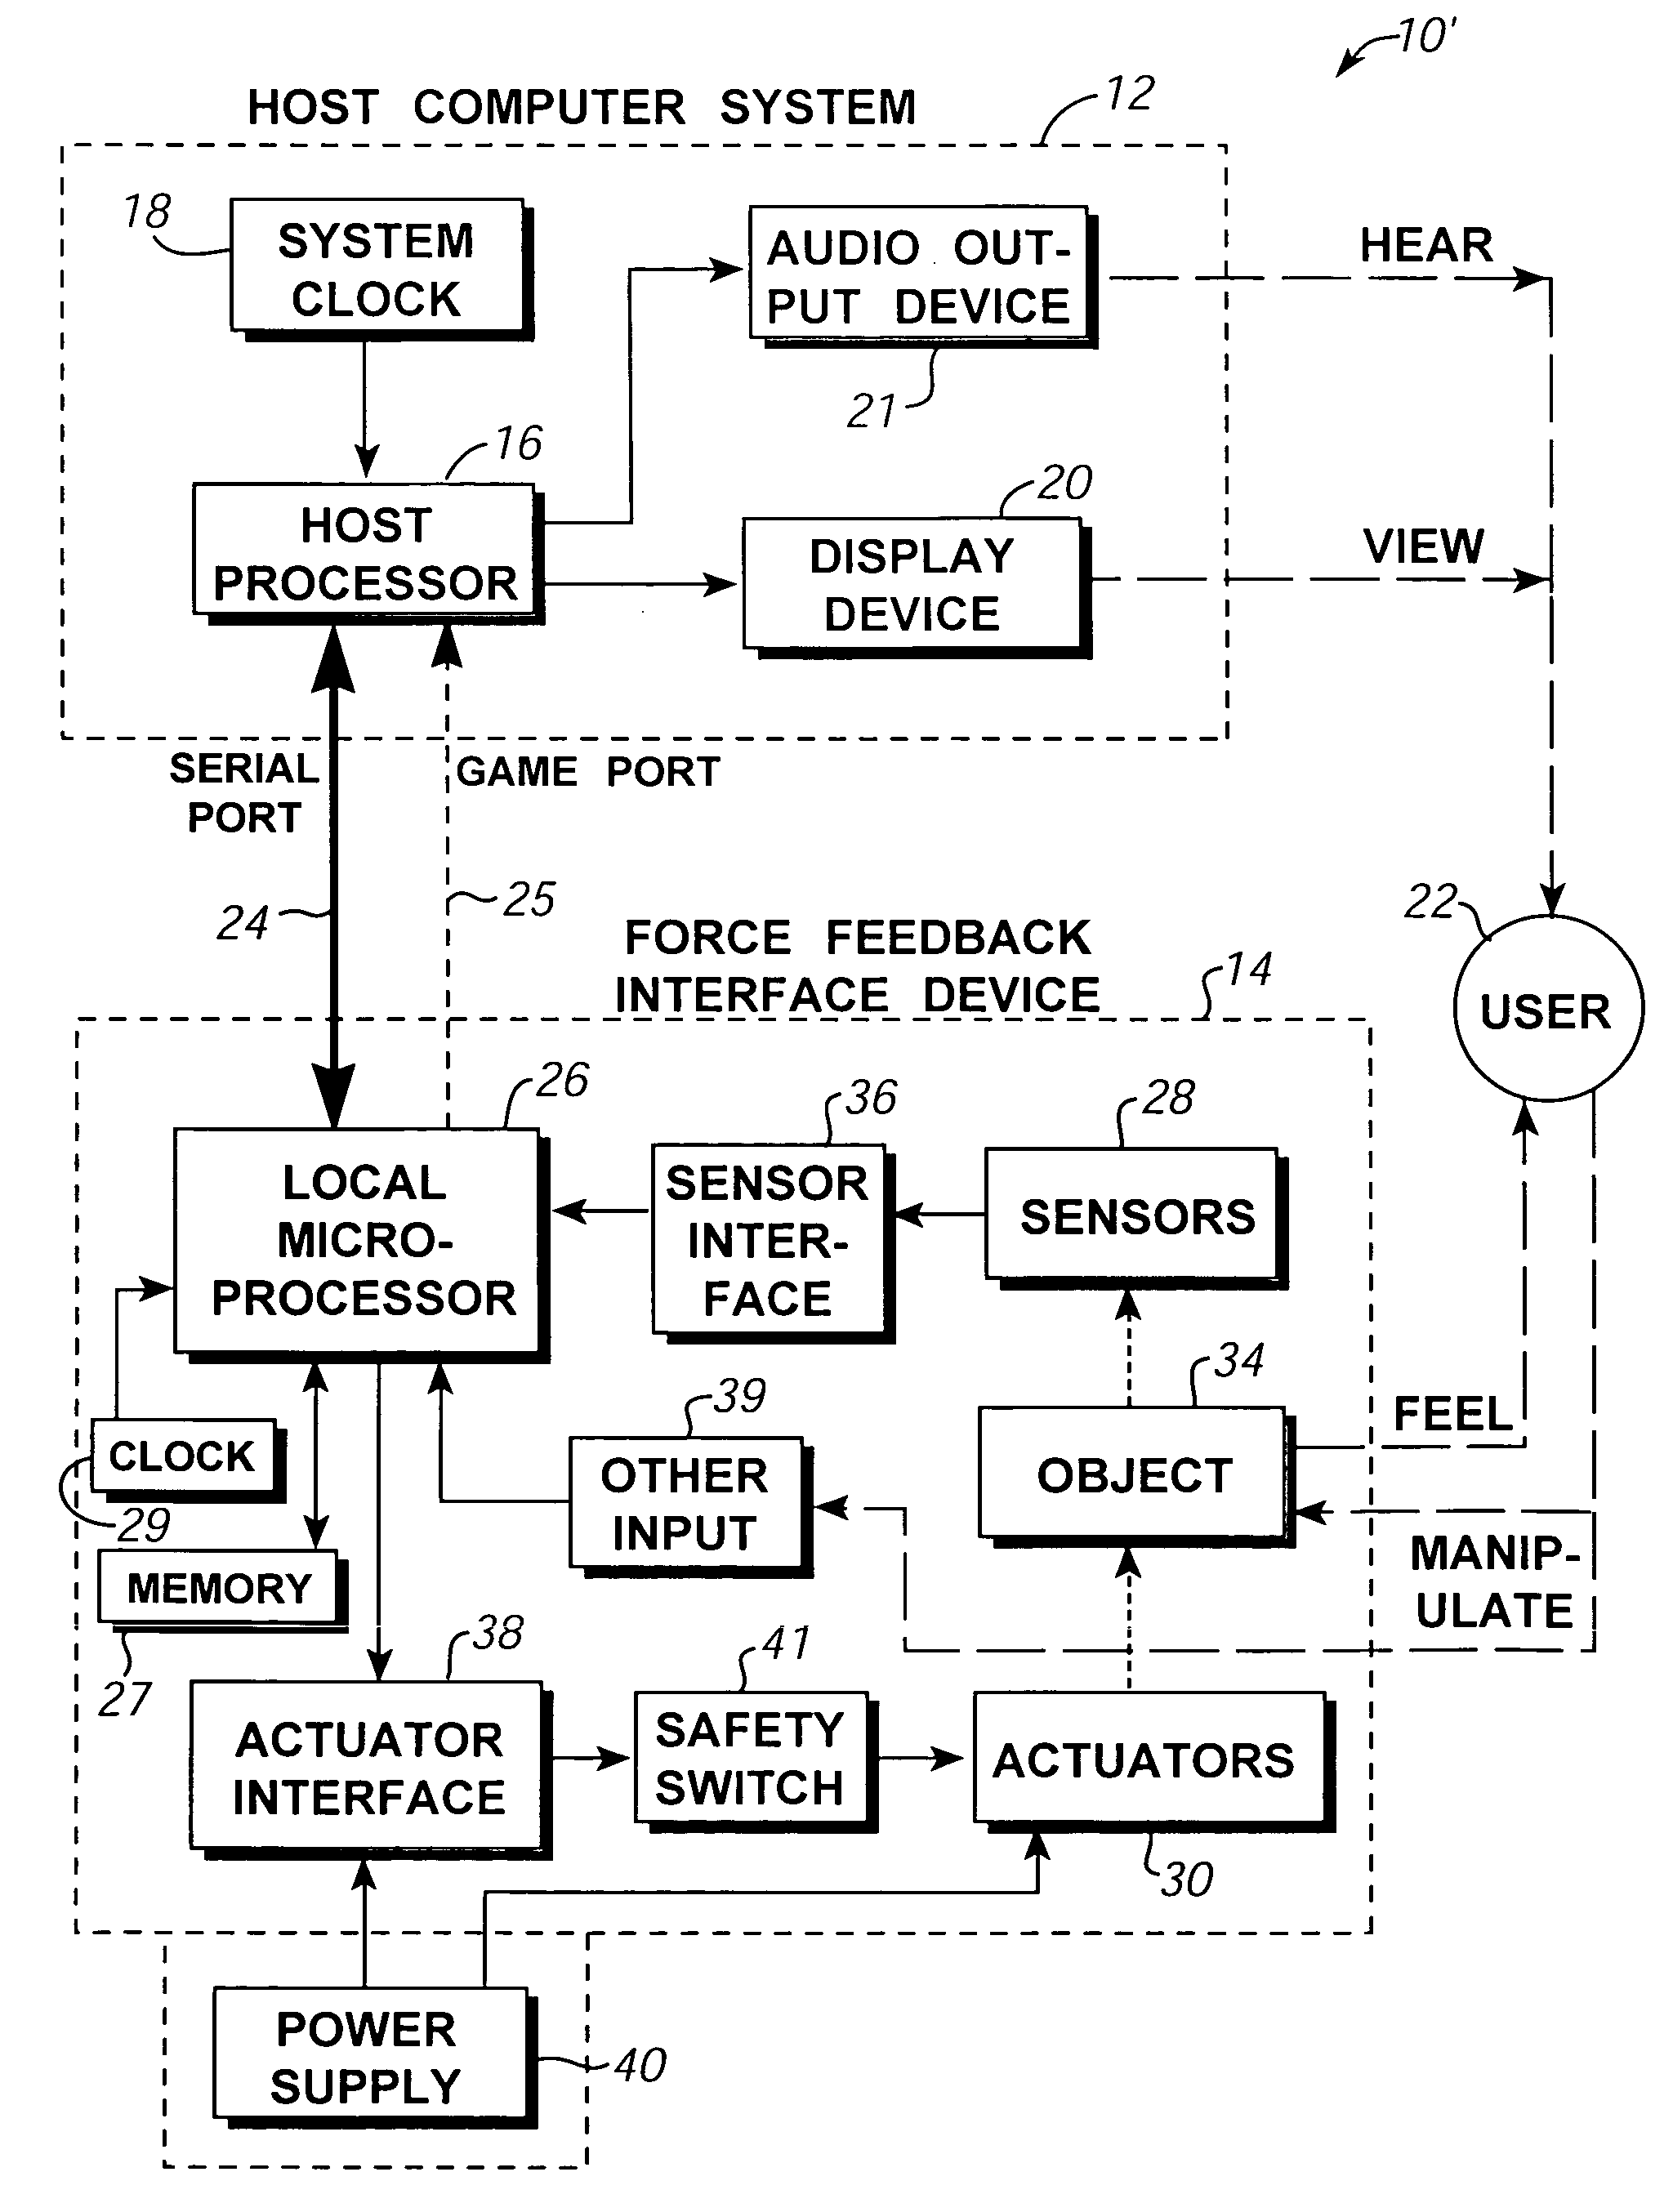 Interactions between simulated objects with force feedback